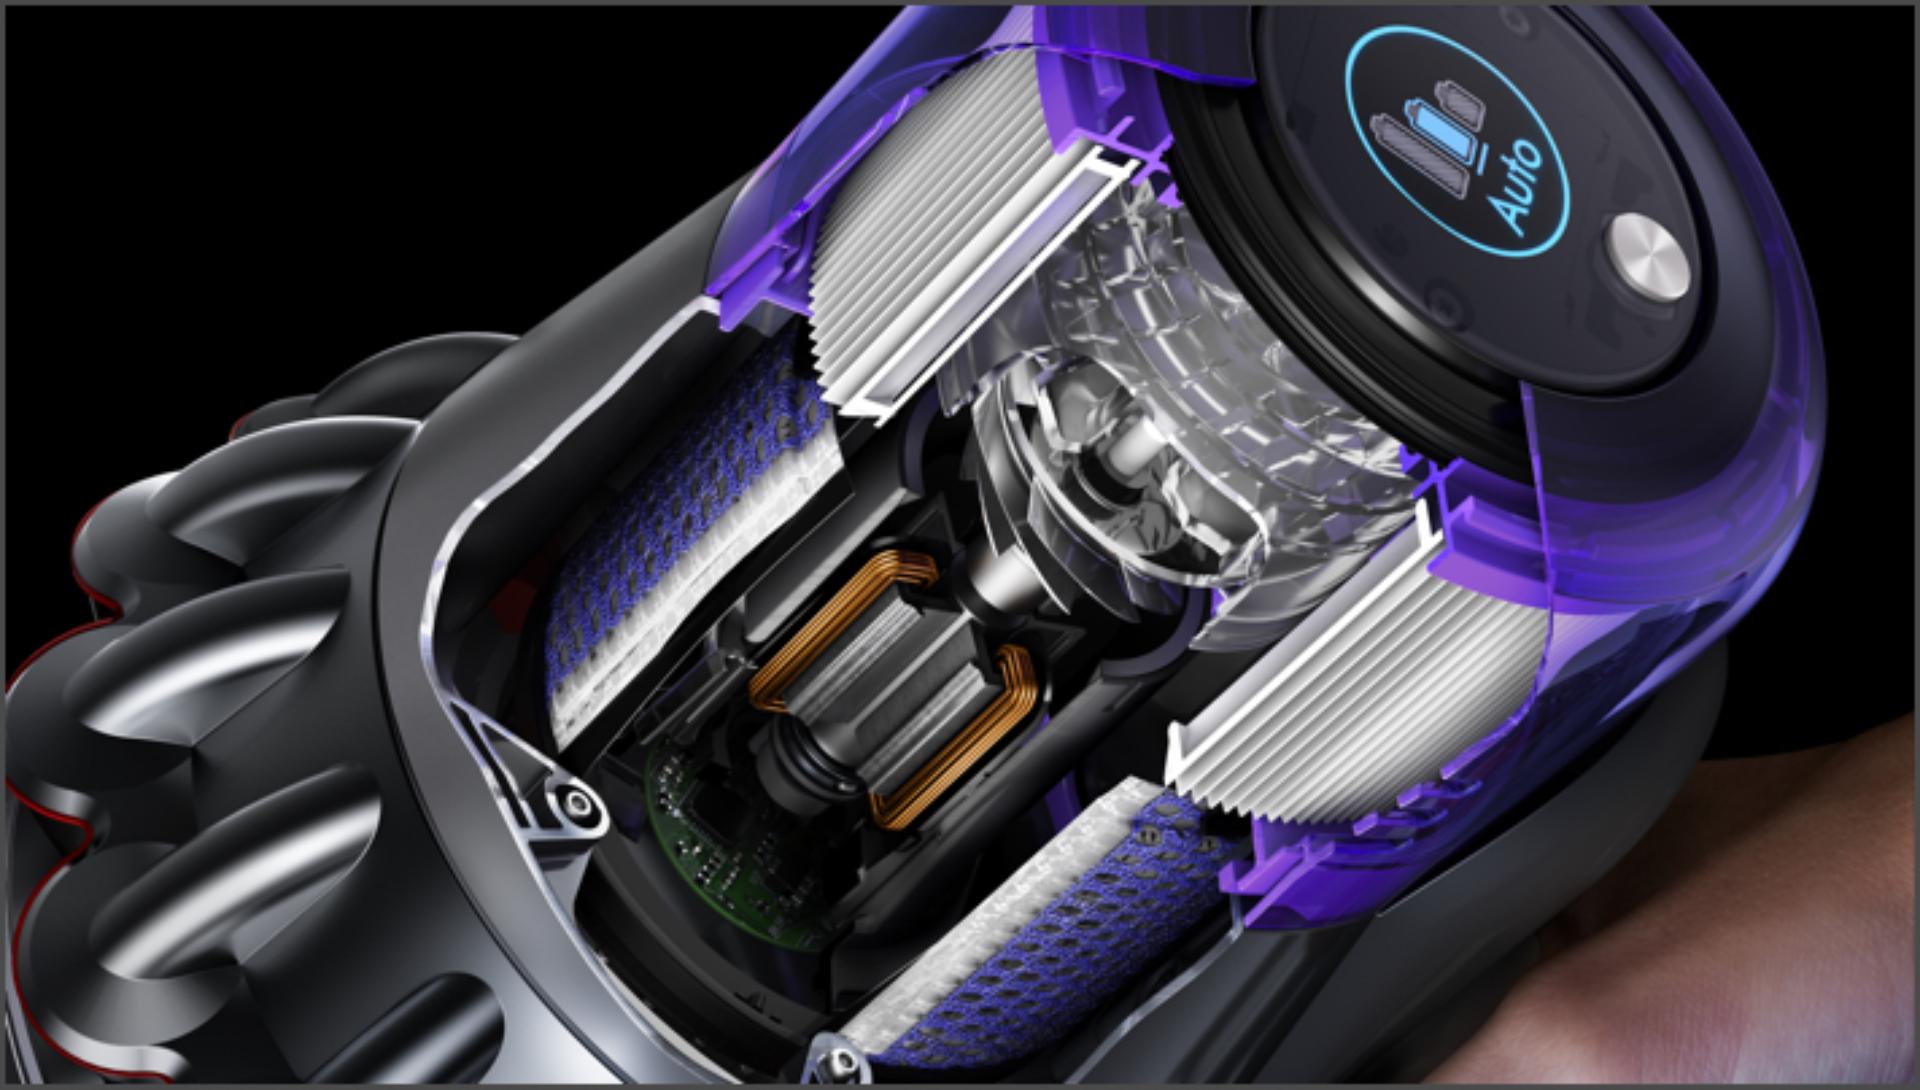 Cutaway of the Dyson V11 Outsize vacuum's motor